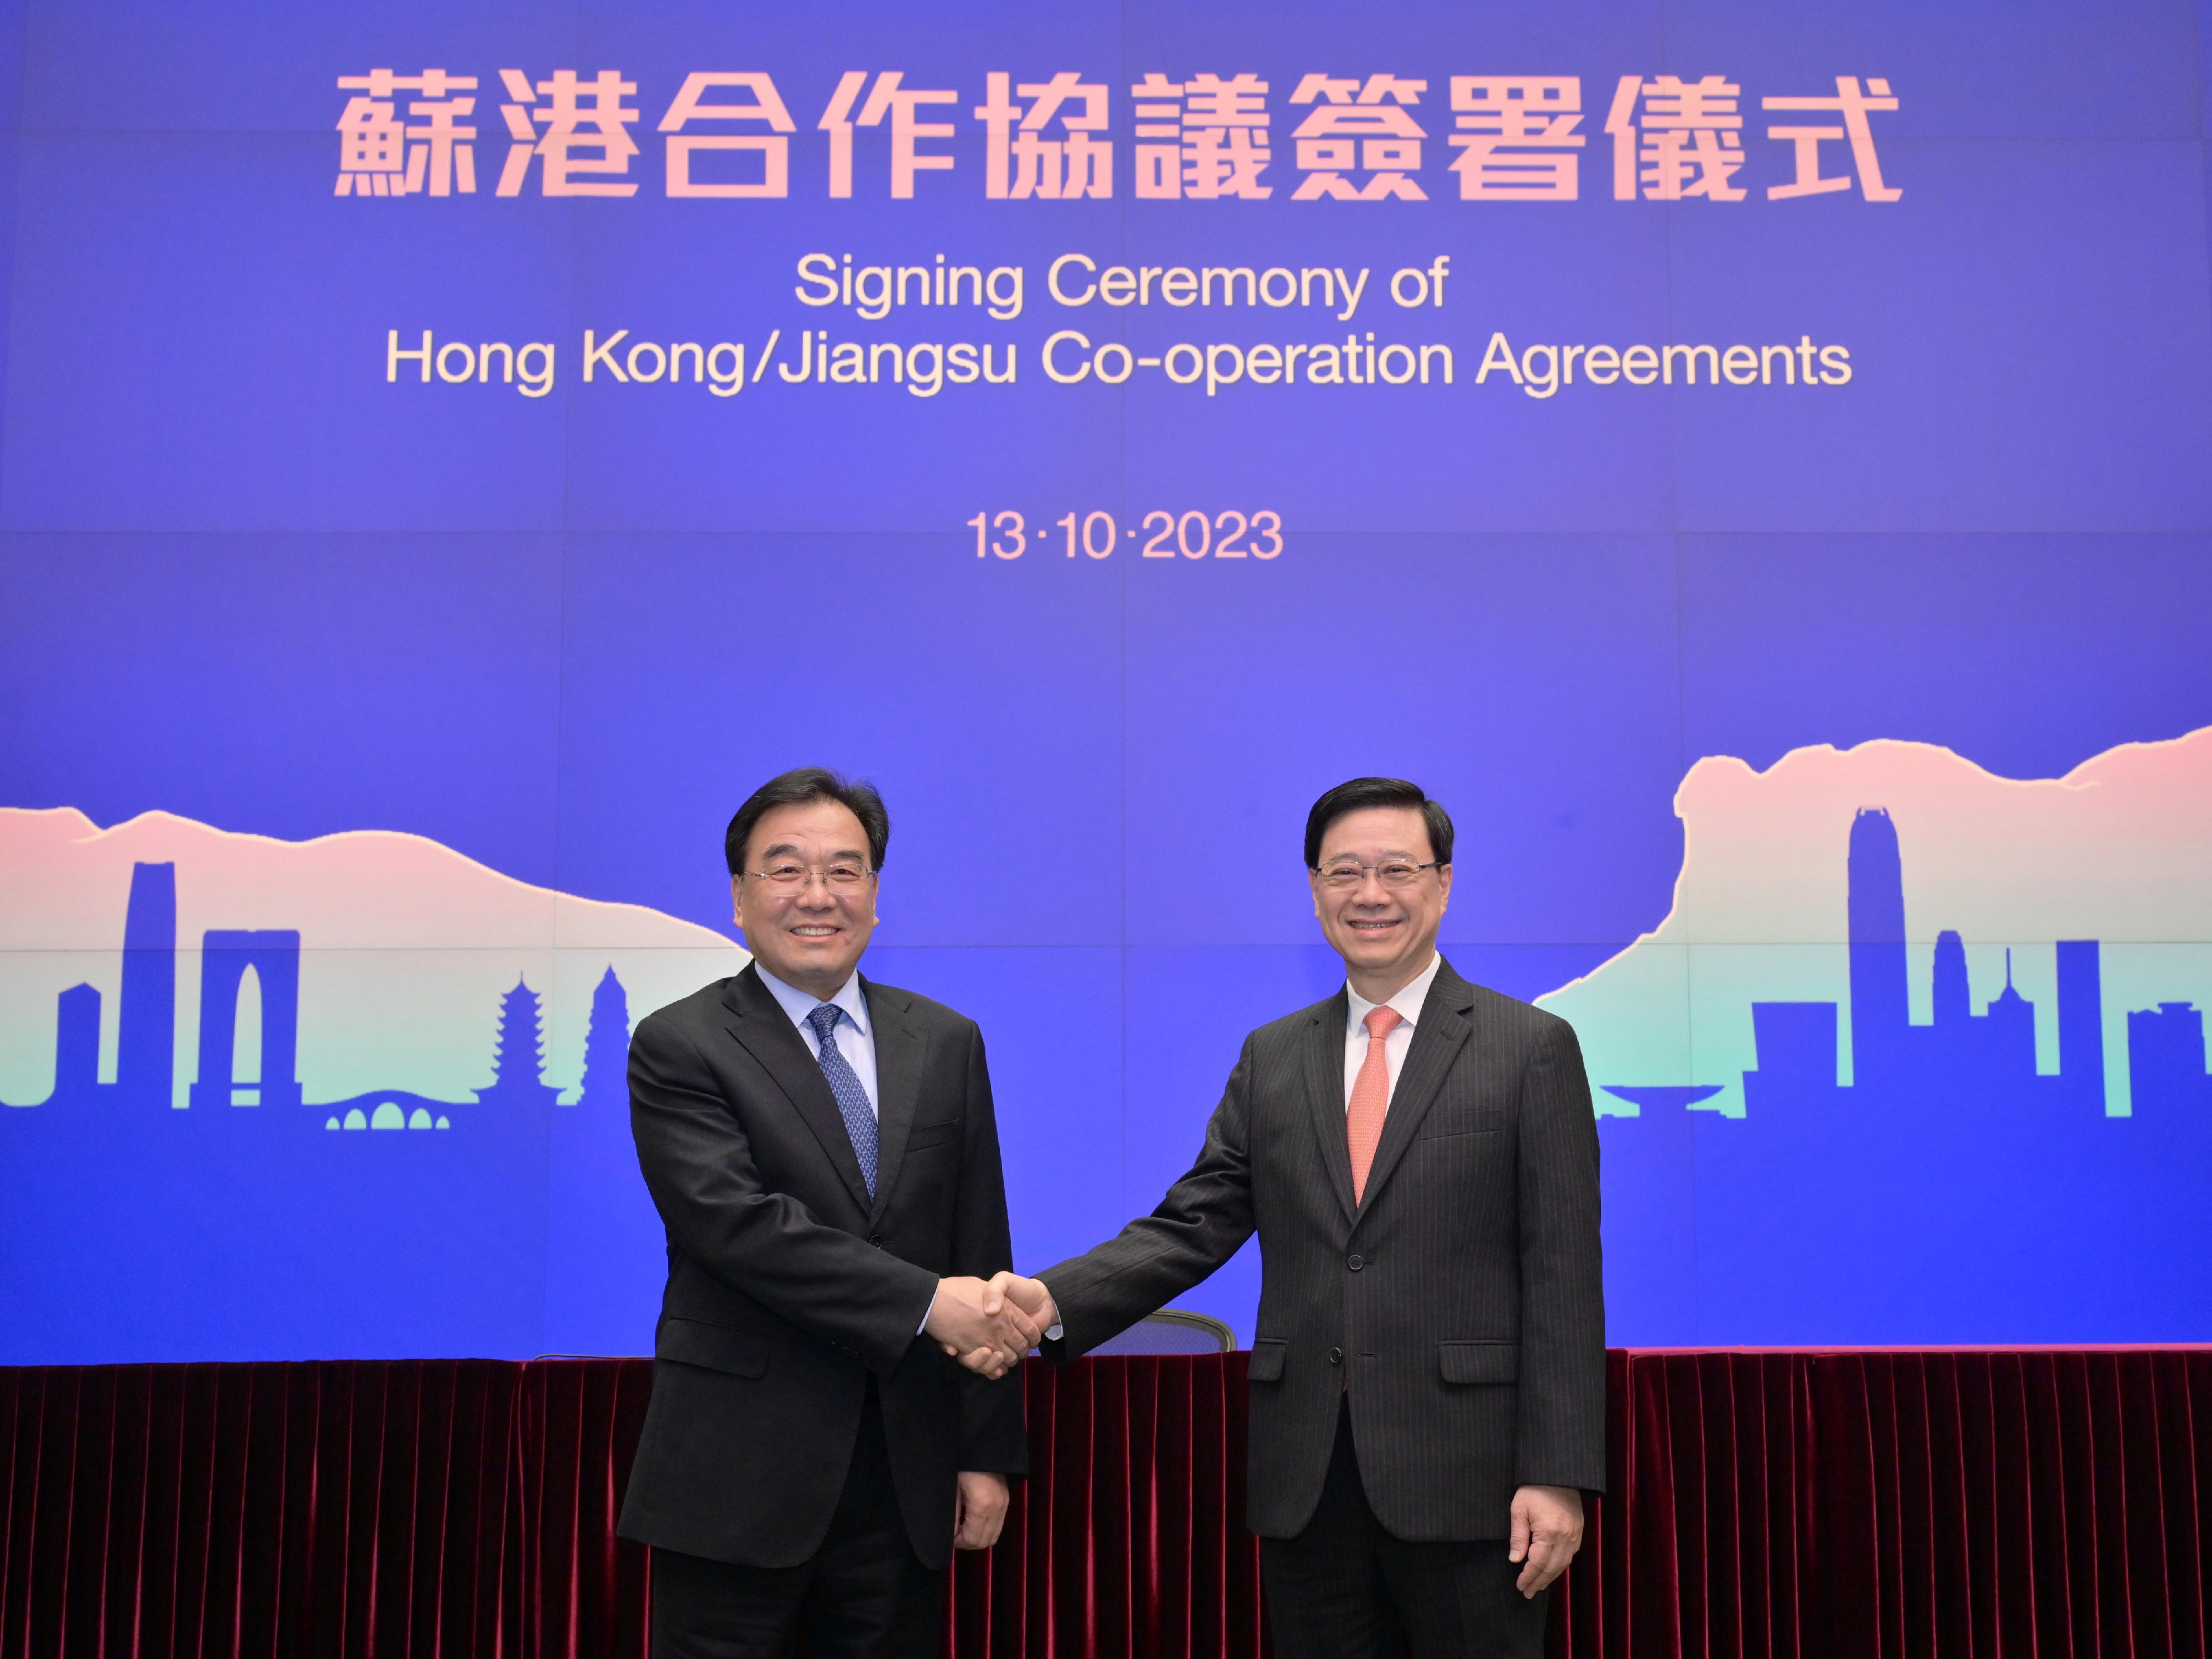 The Chief Executive, Mr John Lee (right), and the Secretary of the CPC Jiangsu Provincial Committee, Mr Xin Changxing (left), leading the delegations of the governments of the Hong Kong Special Administrative Region and Jiangsu respectively, held the High-Level Meeting cum Signing Ceremony of Hong Kong/Jiangsu Co-operation Agreements in Hong Kong today (October 13).